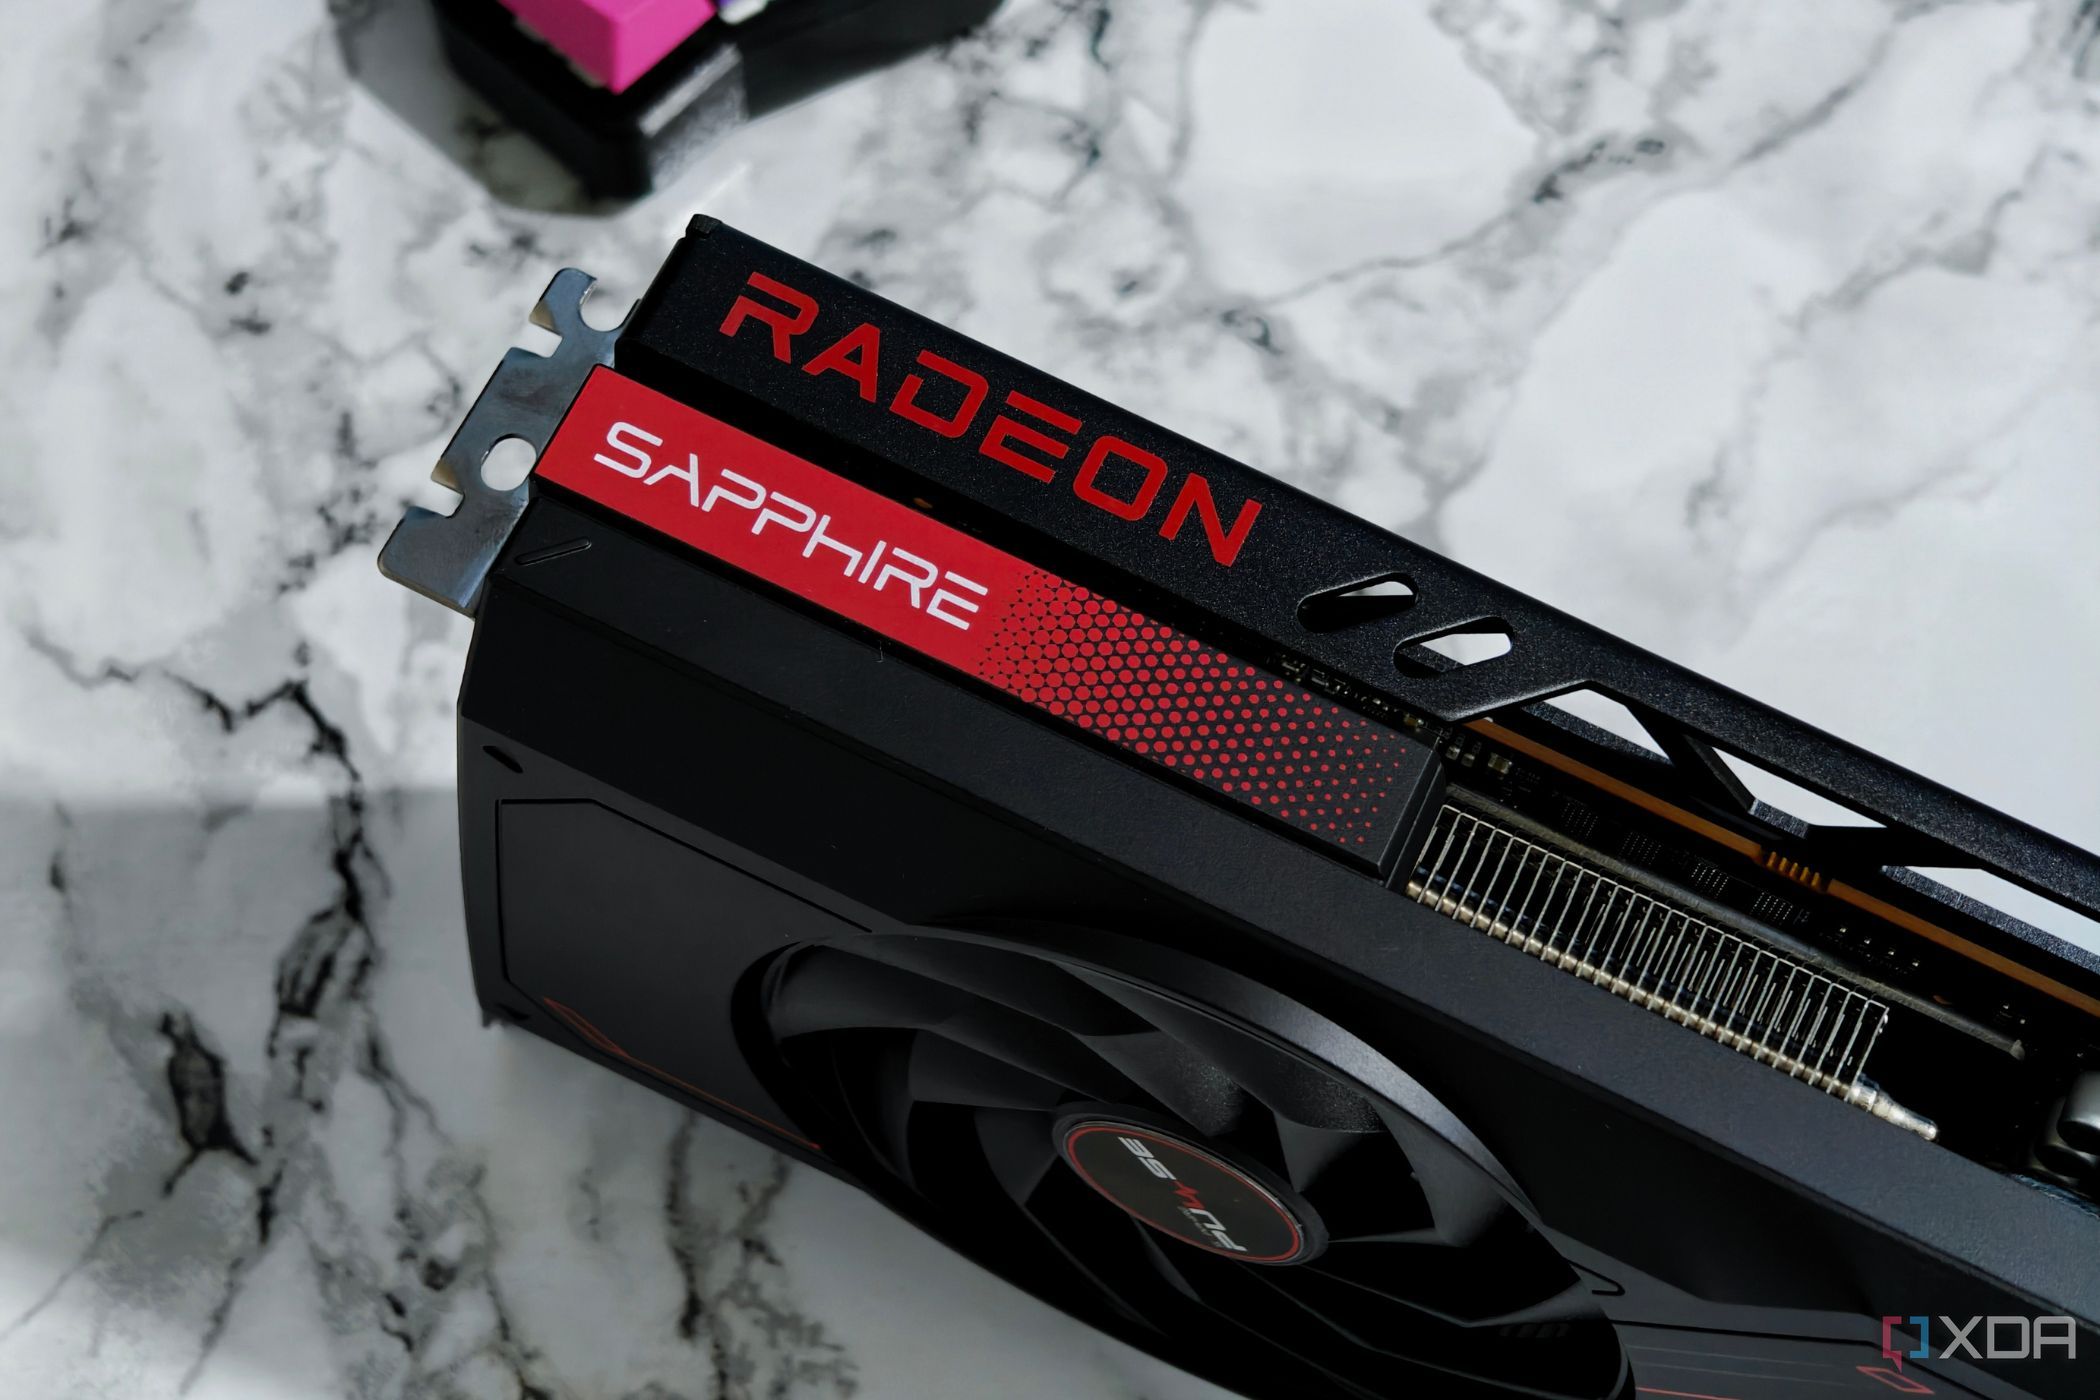 An image showing an AMD Radeon RX 7700 XT GPU kept on a desk with a marble finish.